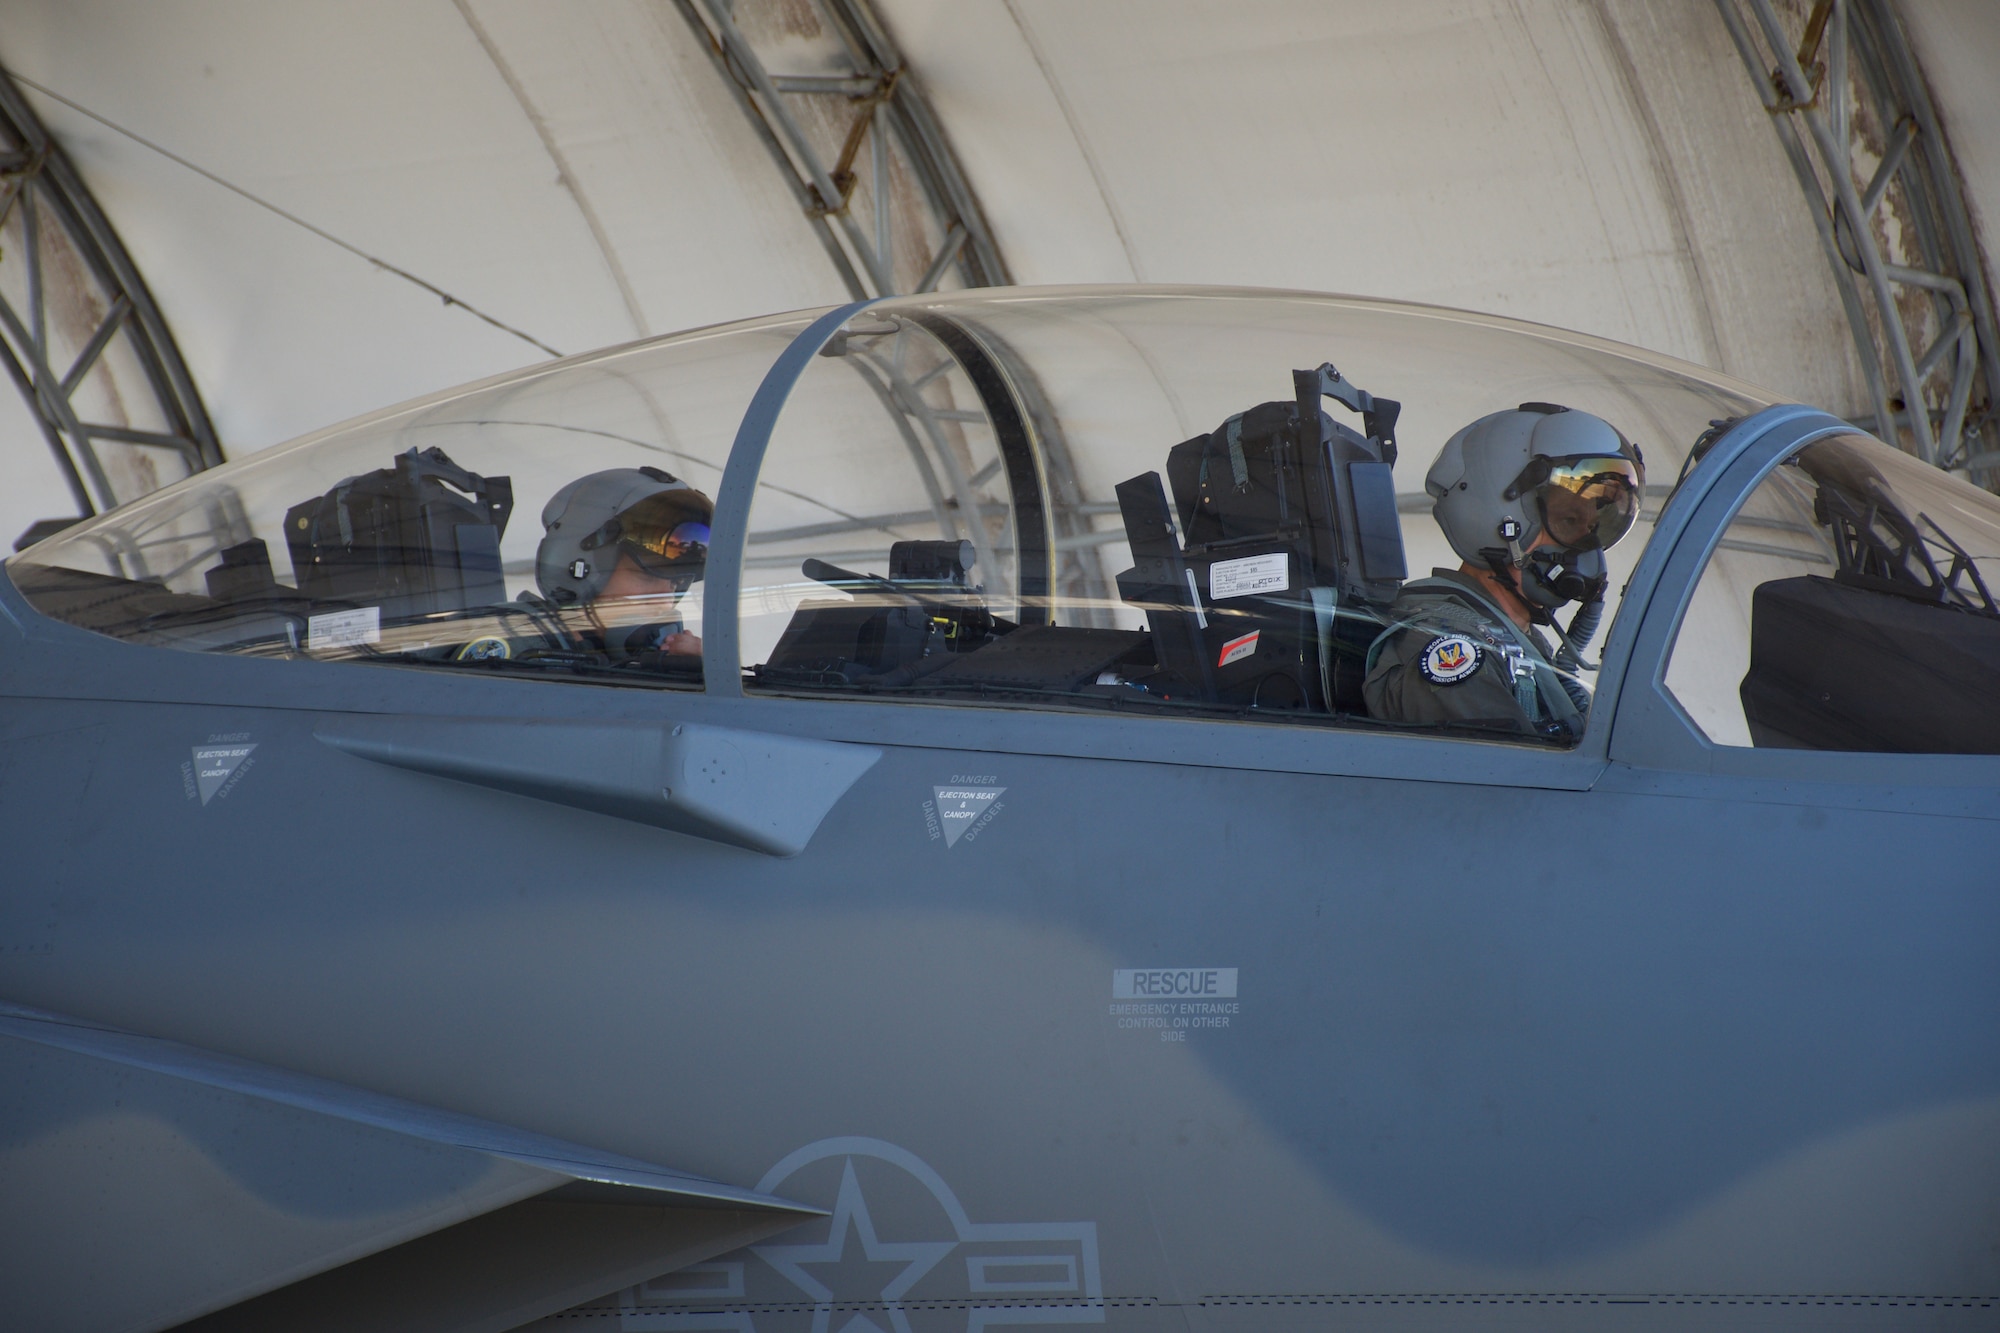 Gen Mark Kelly, Commander of Air Combat Command, prepares for his F-15EX qualification flight in tail “002” after completing the requisite academic and simulator training at Eglin Air Force Base, Fla, Sept. 1, 2021. A fighter pilot with over 6,000 hours in multiple aircraft, Gen Kelly is now one of two pilots in the world who’ve flown both the F-15EX and F-35A. (U.S. Air Force photo by 1st Lt Lindsey Heflin)